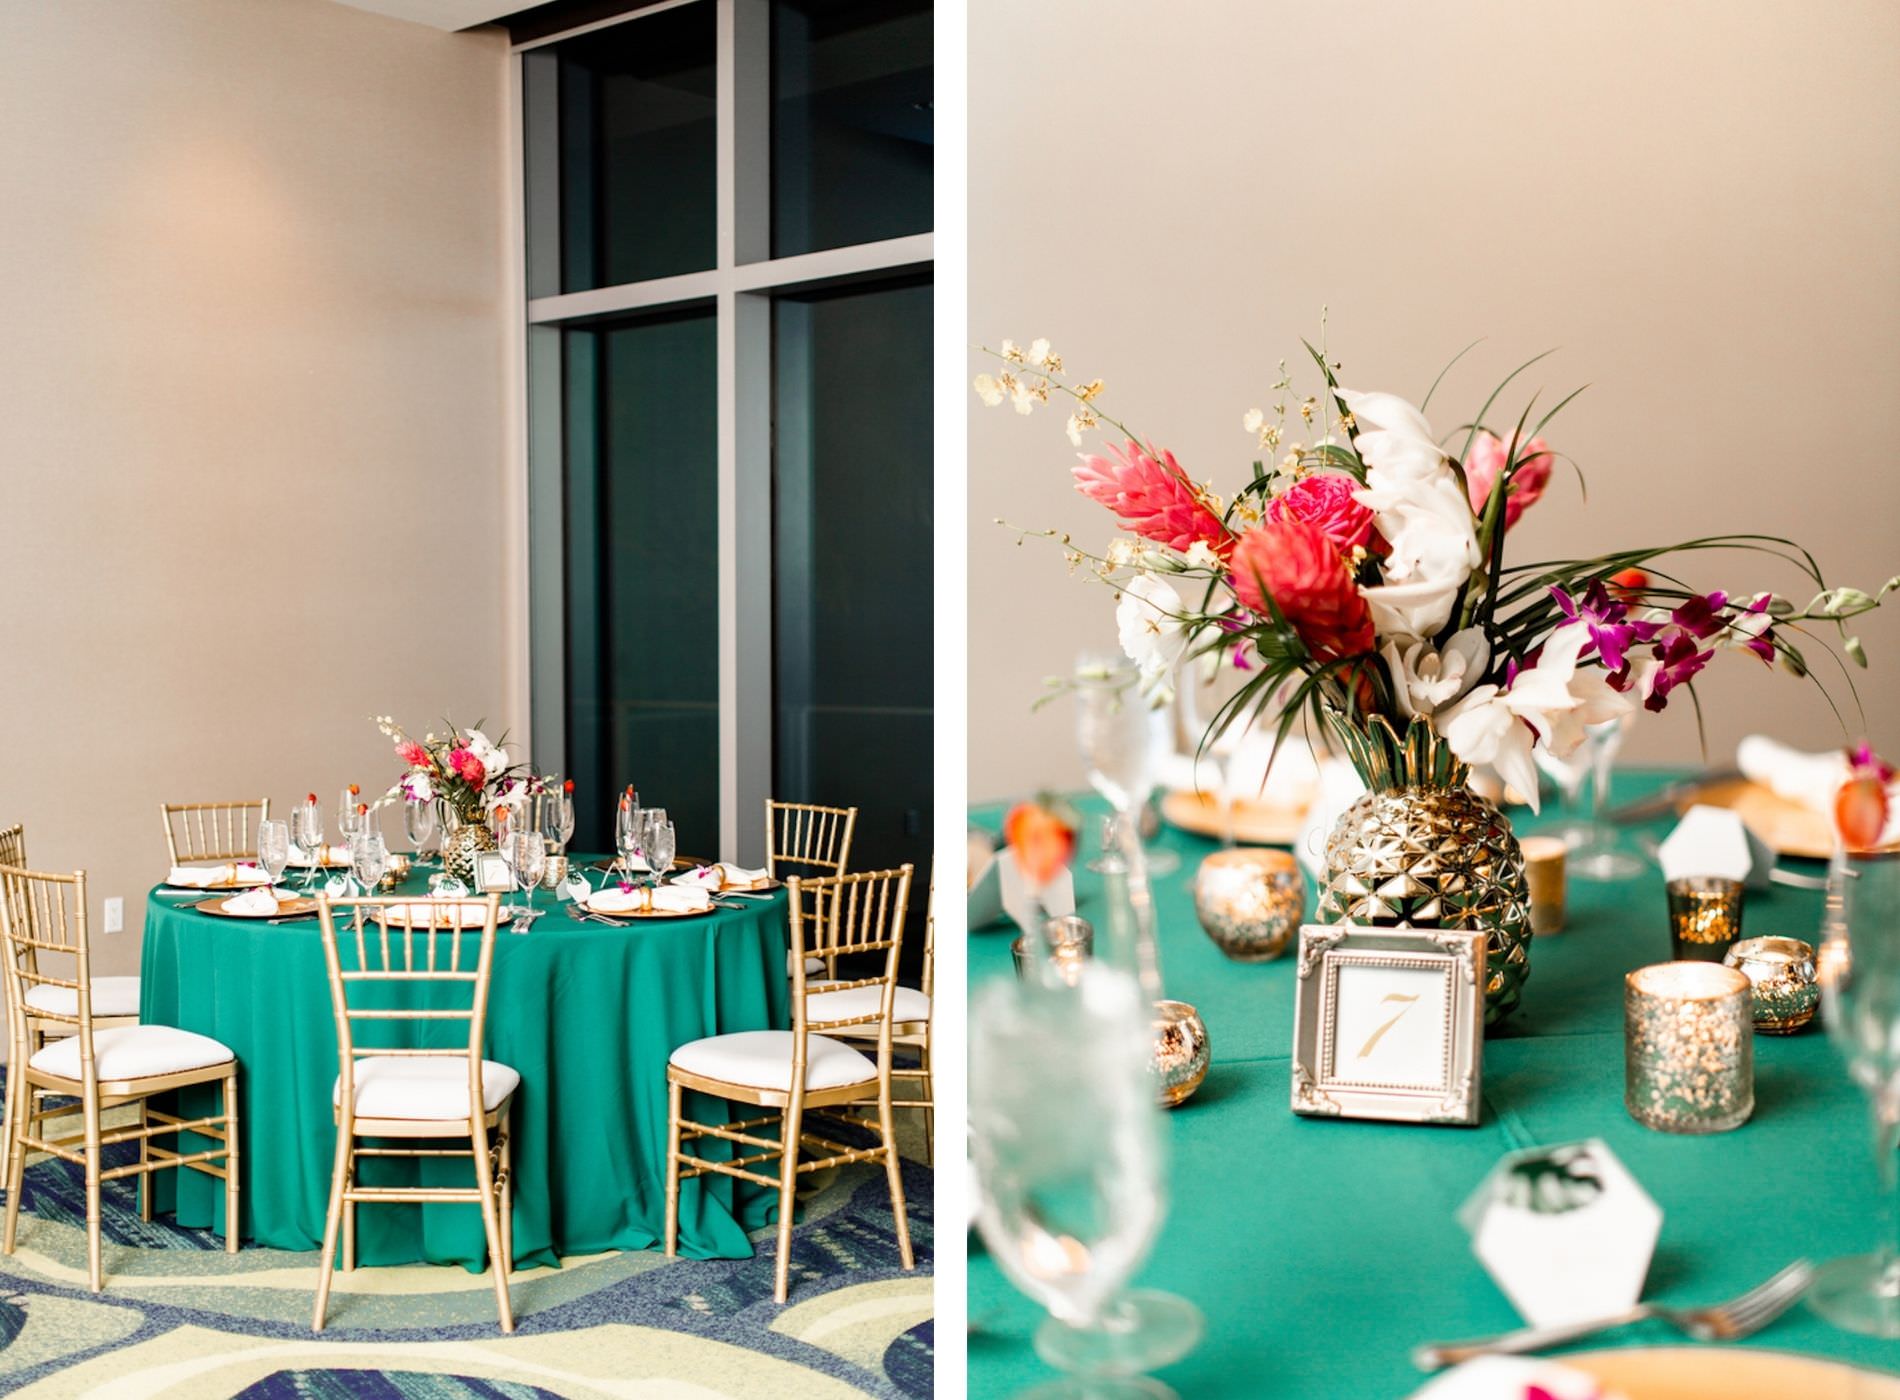 Tropical Elegant Wedding Reception Decor, Teal Tablecloth, Gold Chiavari Chairs, Gold Painted Pineapple with Pink Ginver, White and Purple Flowers, Gold Mercury Candles | Tampa Bay Wedding Planner Special Moments Event Planning | Clearwater Beach Opal Sands Resort